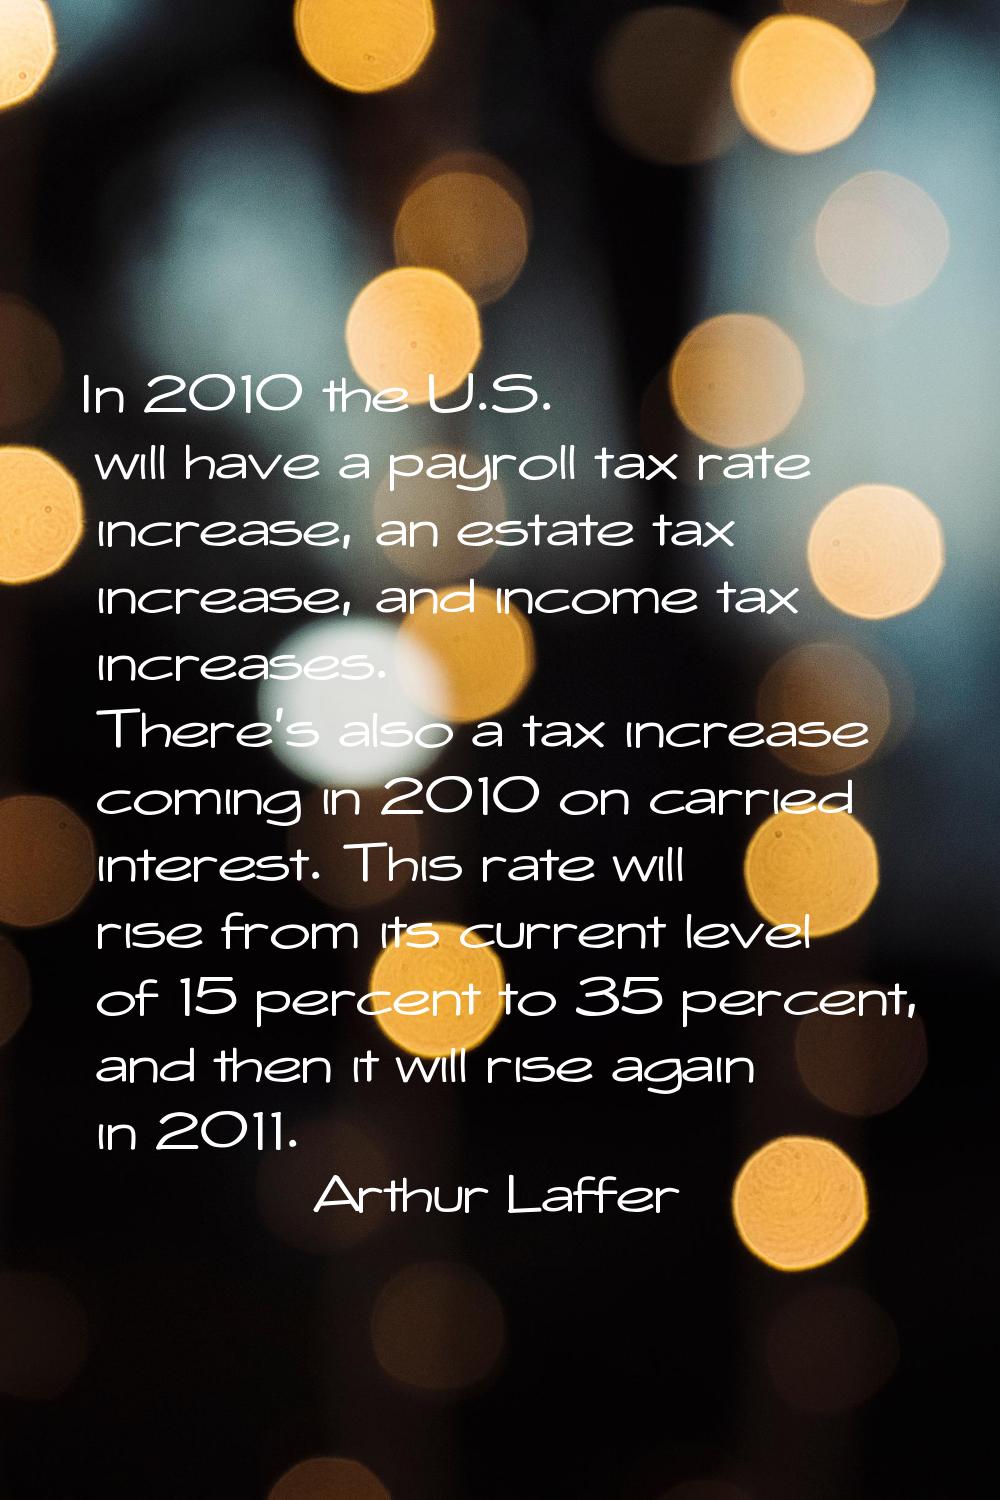 In 2010 the U.S. will have a payroll tax rate increase, an estate tax increase, and income tax incr